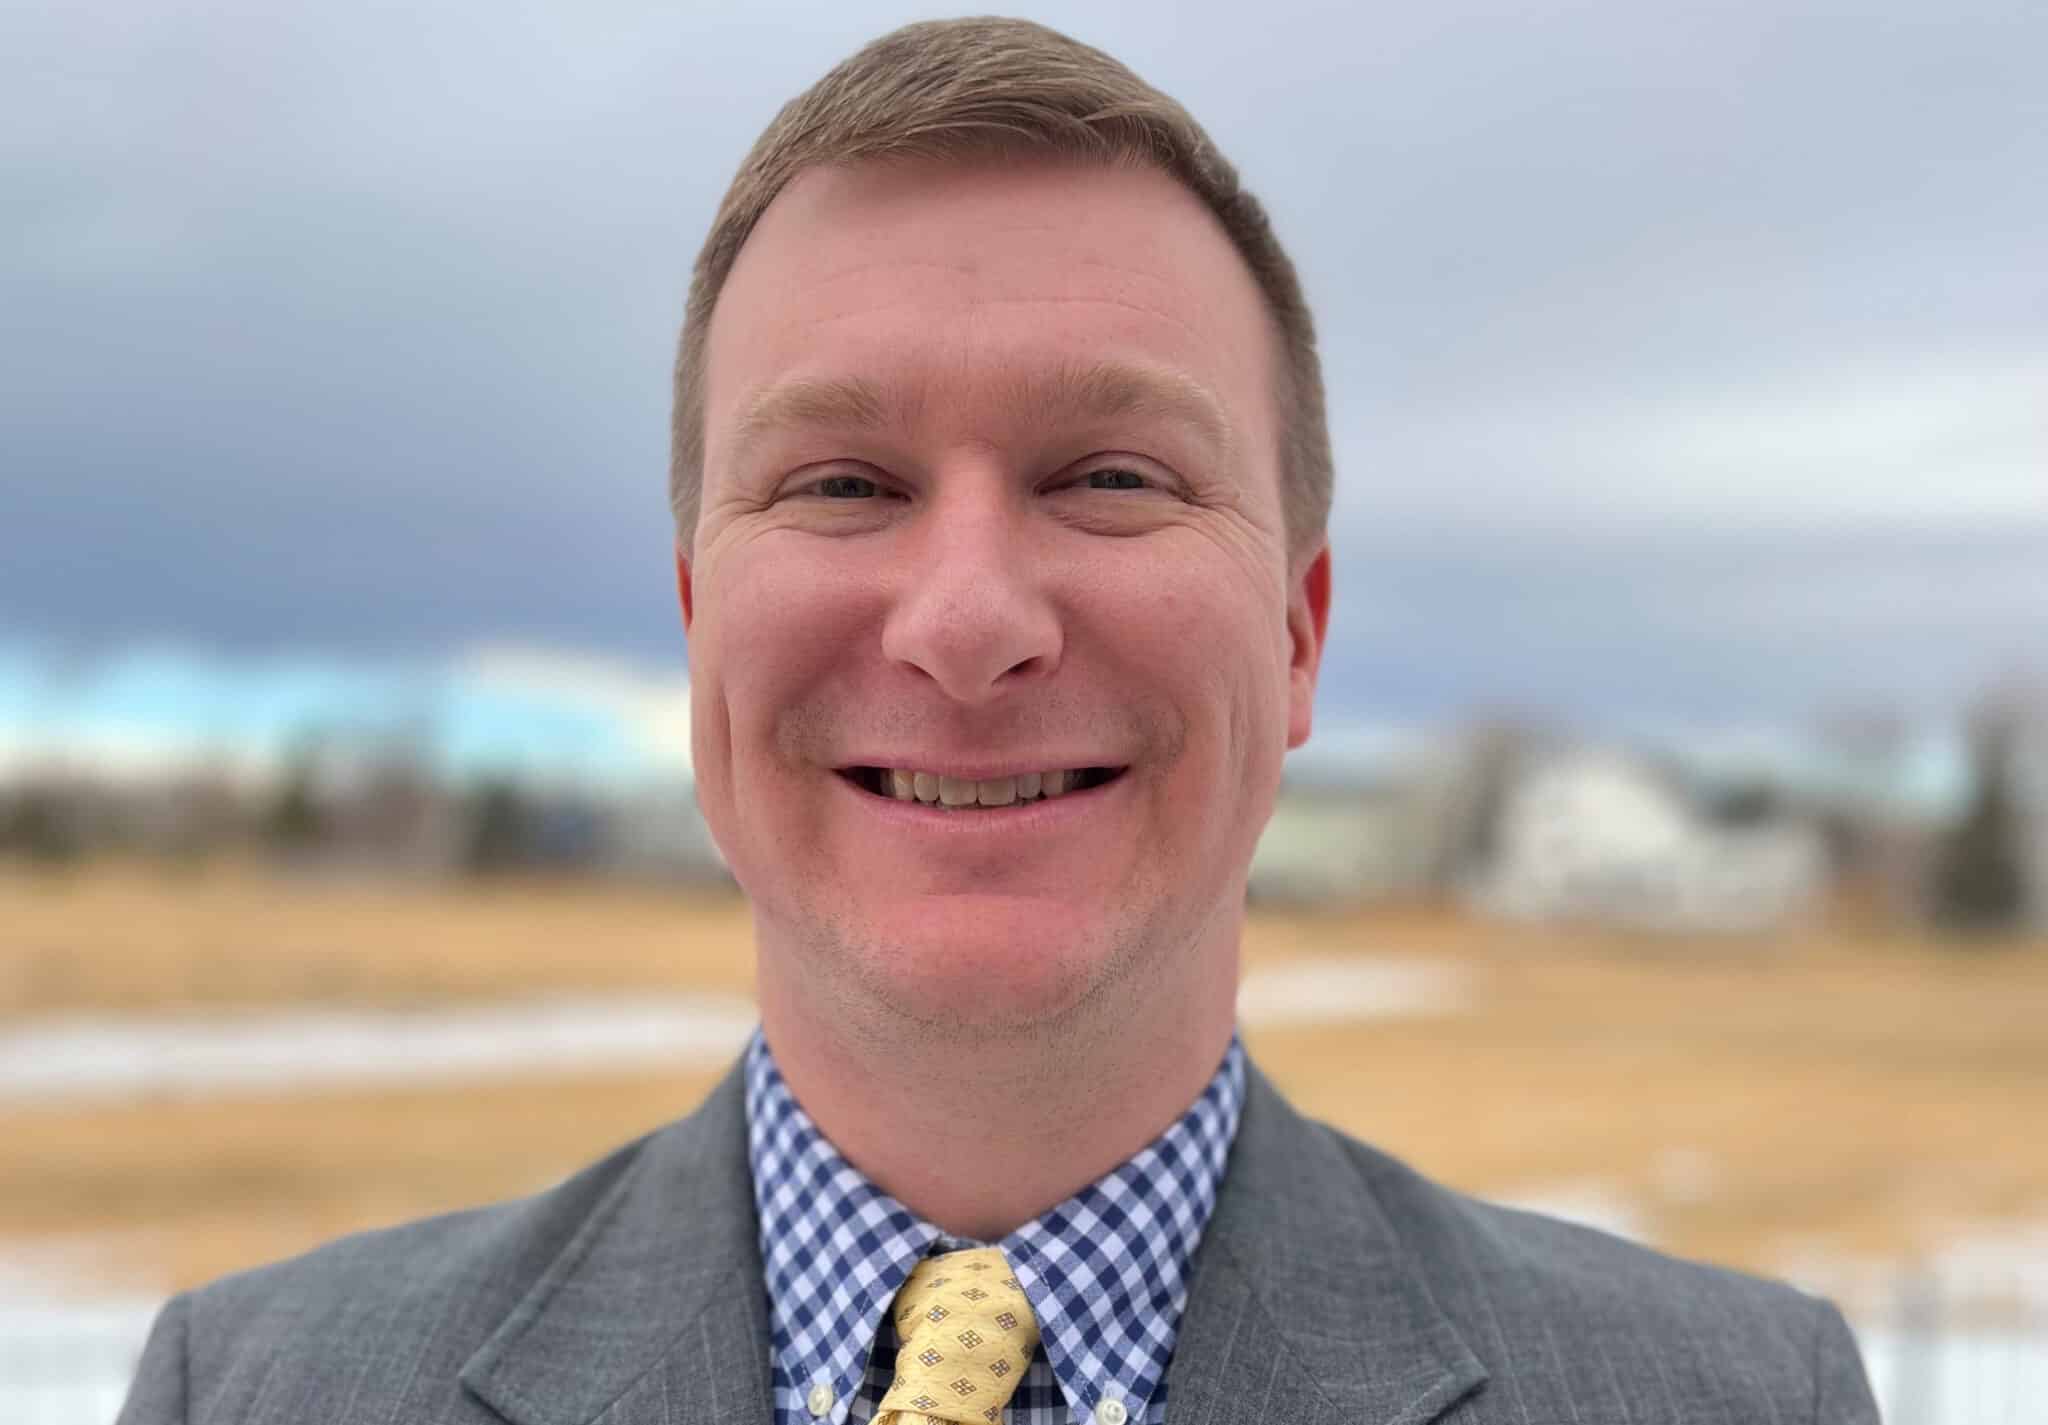 Eric Browning is Denver’s new chief building official